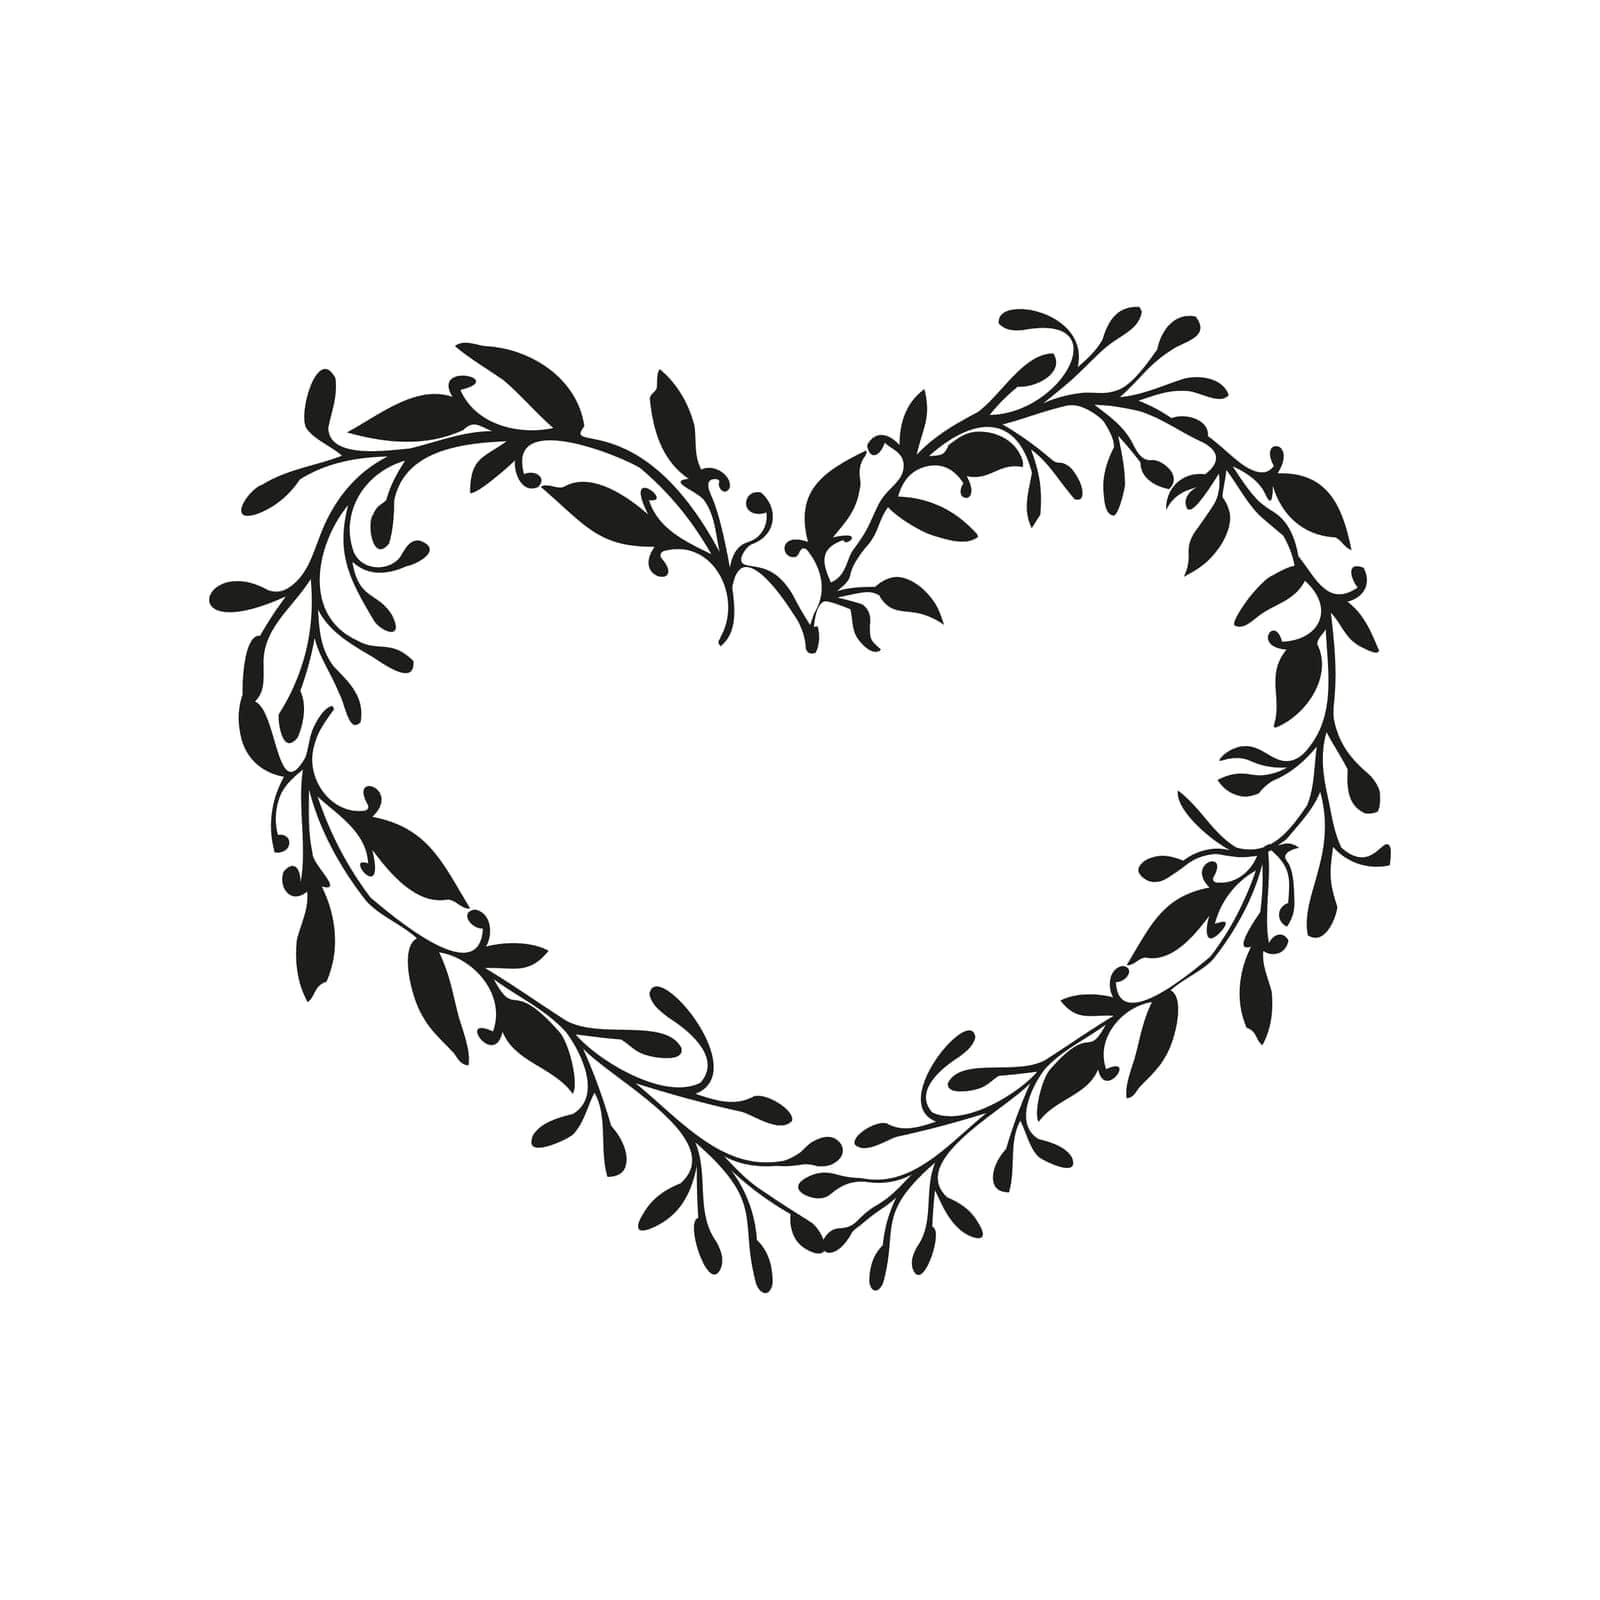 Floral heart frame for wedding or Valentines day card